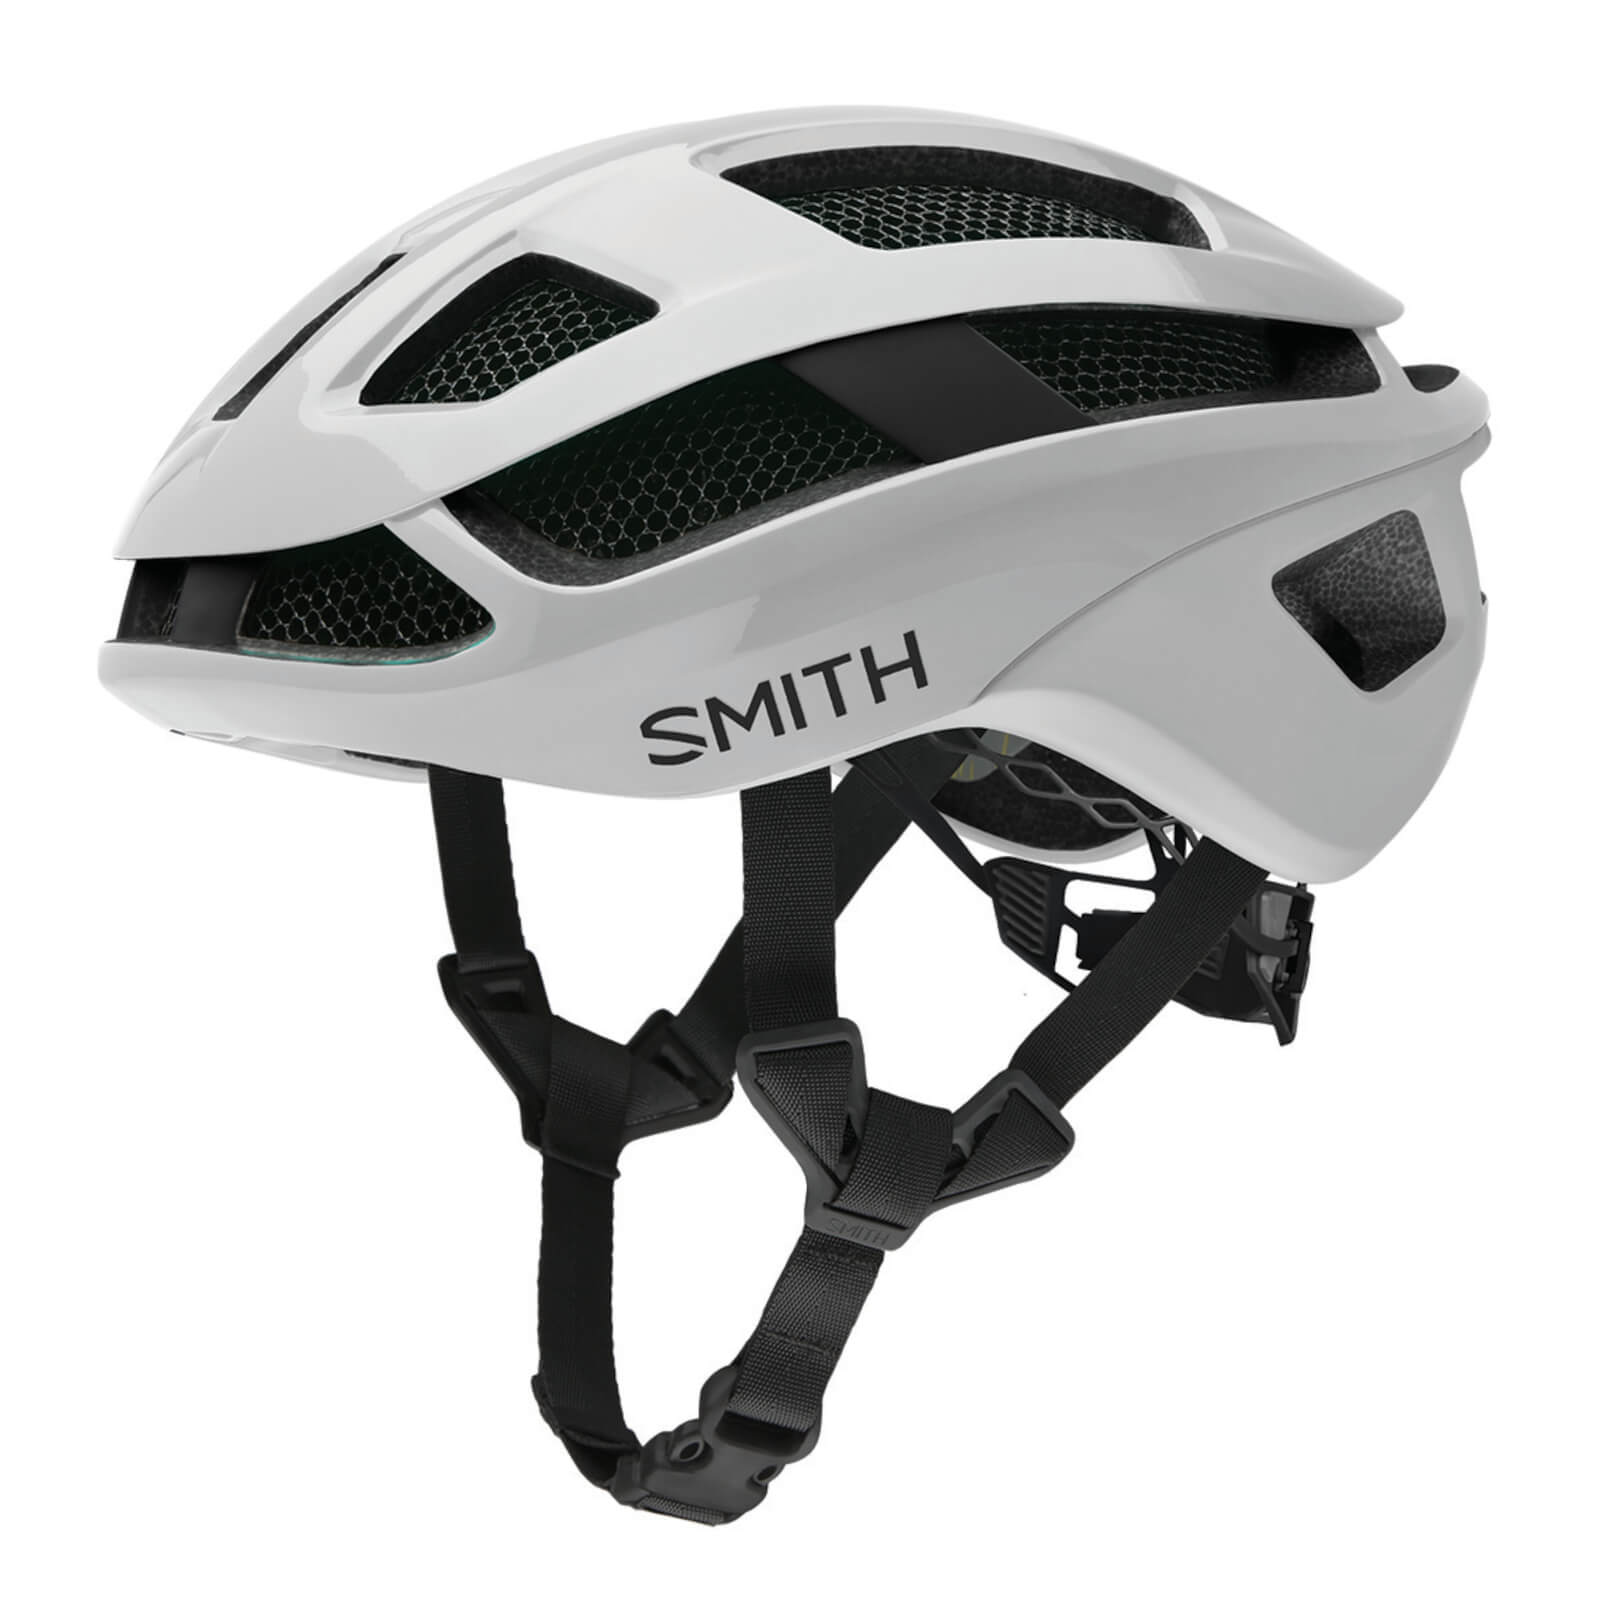 Smith Trace MIPS Road Helmet - Large - White Matte White